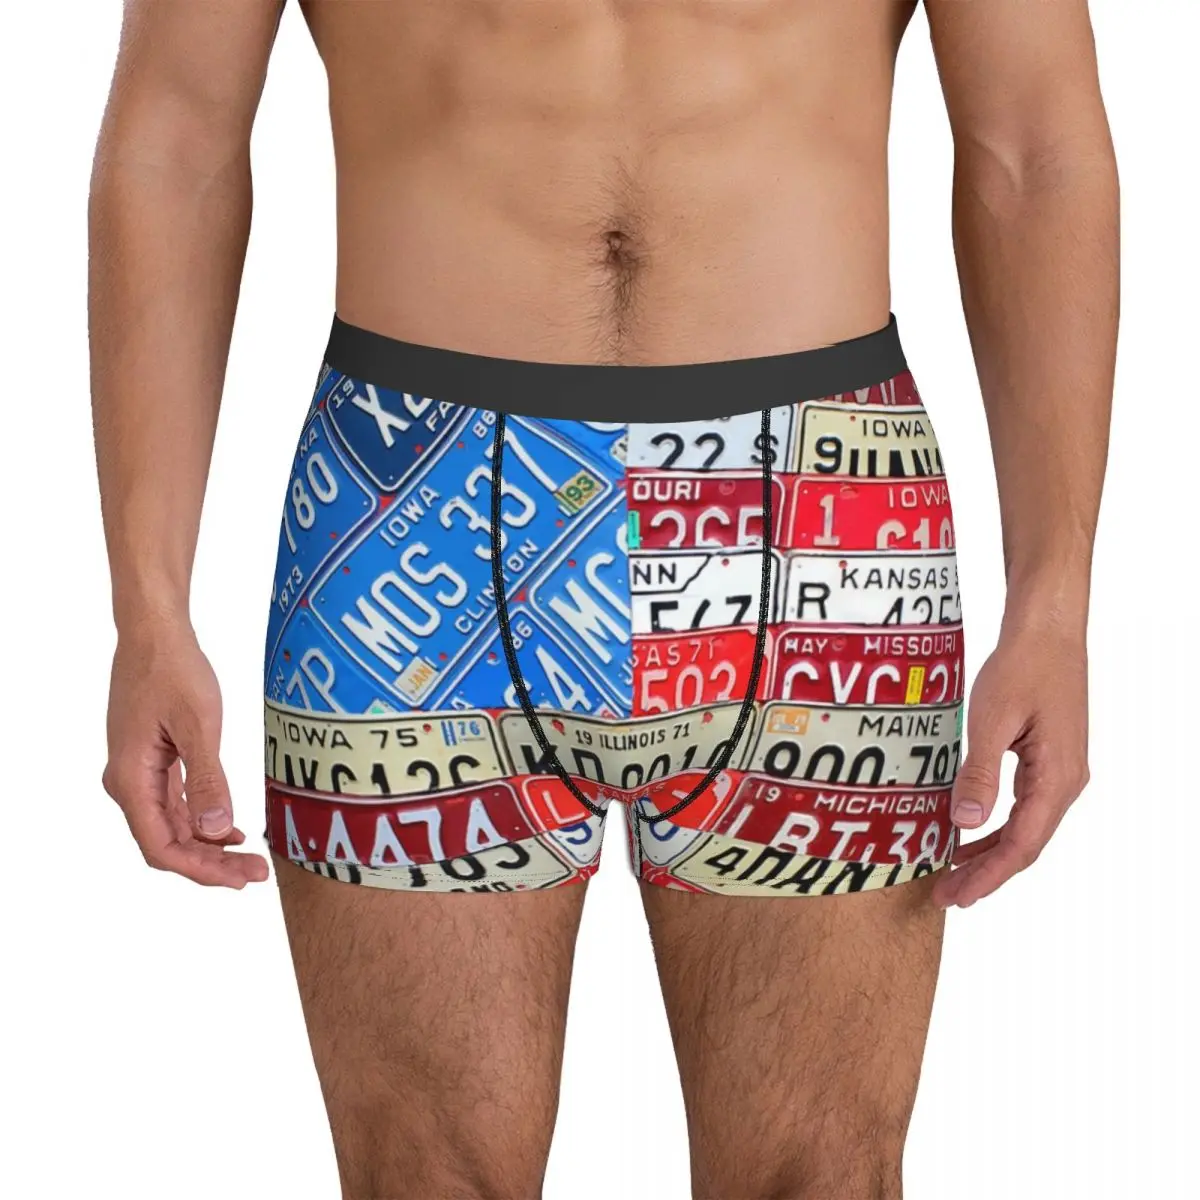 4th Of July American Flag Underwear Recycled License Plates Stretch Panties Printed Shorts Briefs Pouch  Large Size Boxershorts